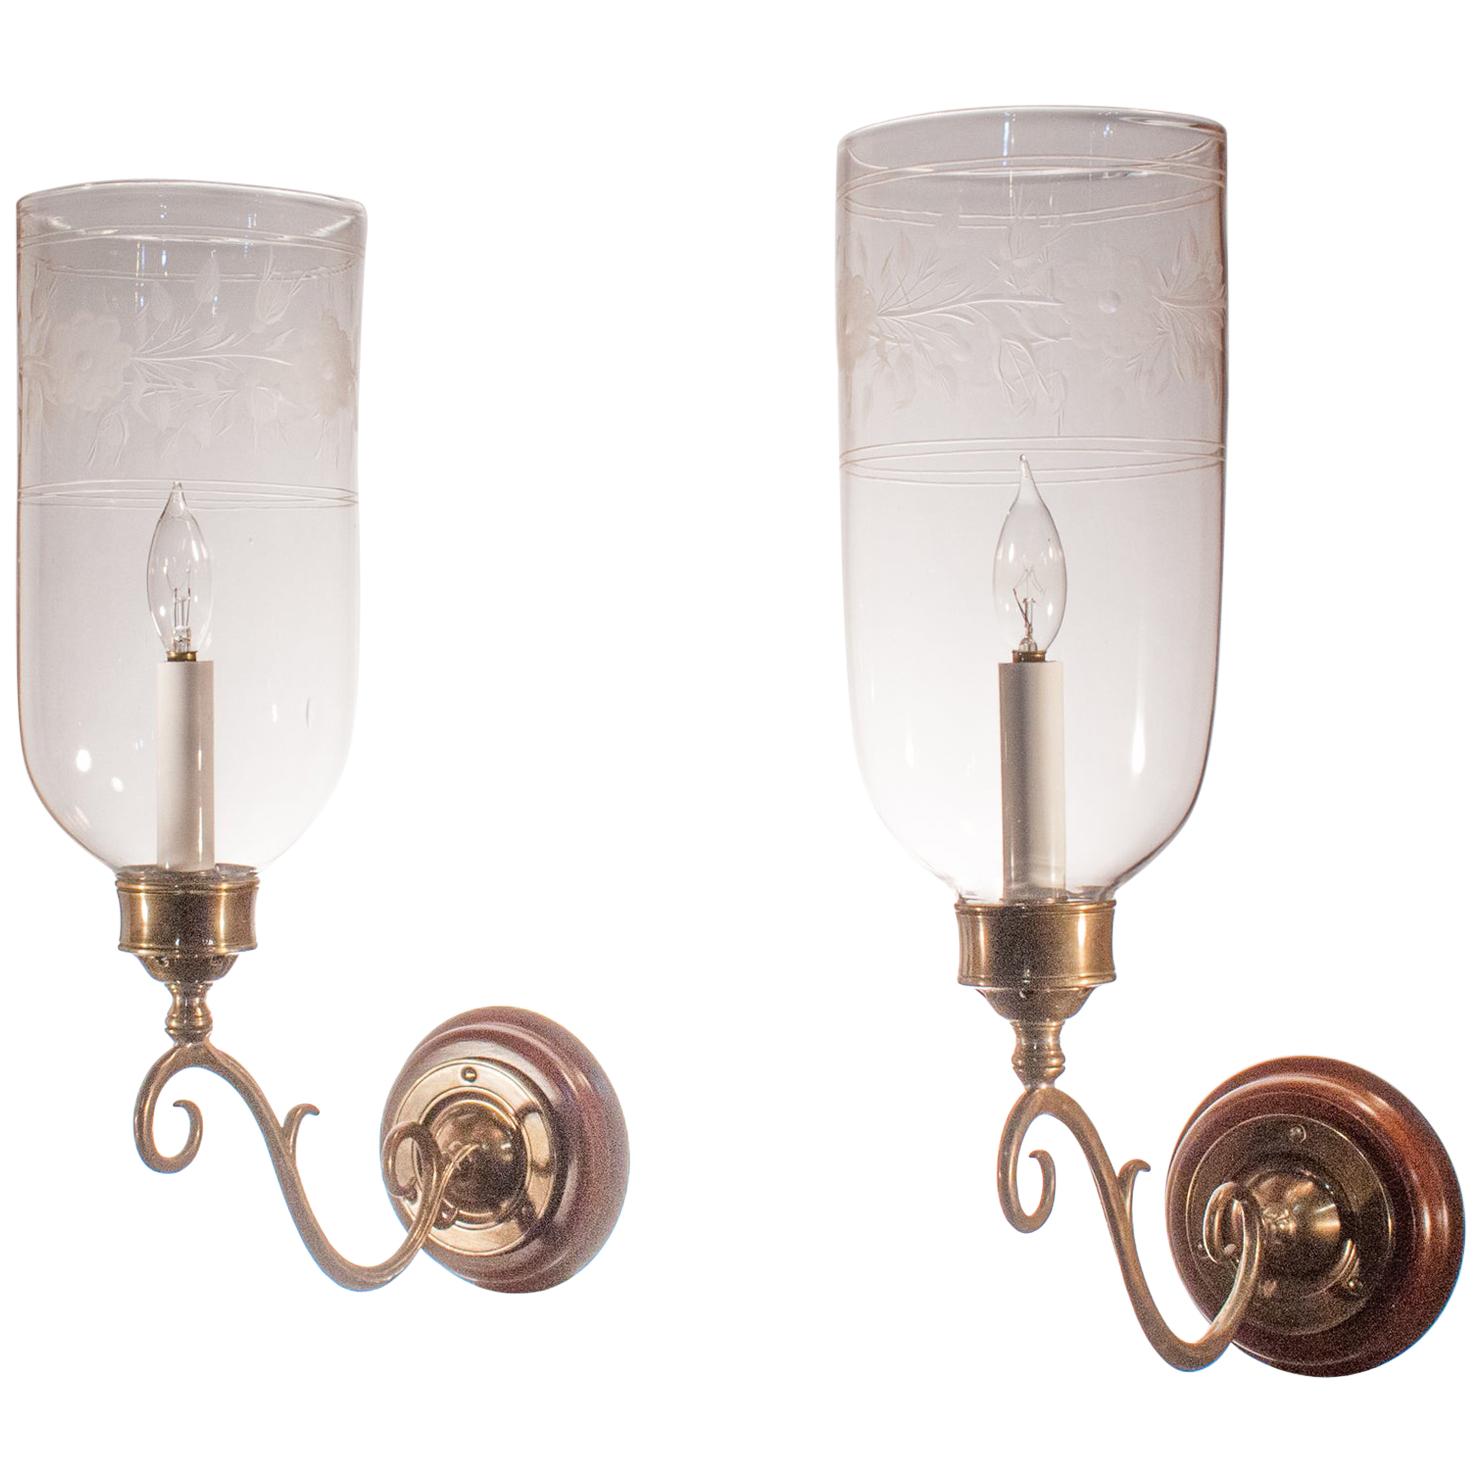 Pair of Antique Hurricane Shade Sconces with Floral Etching